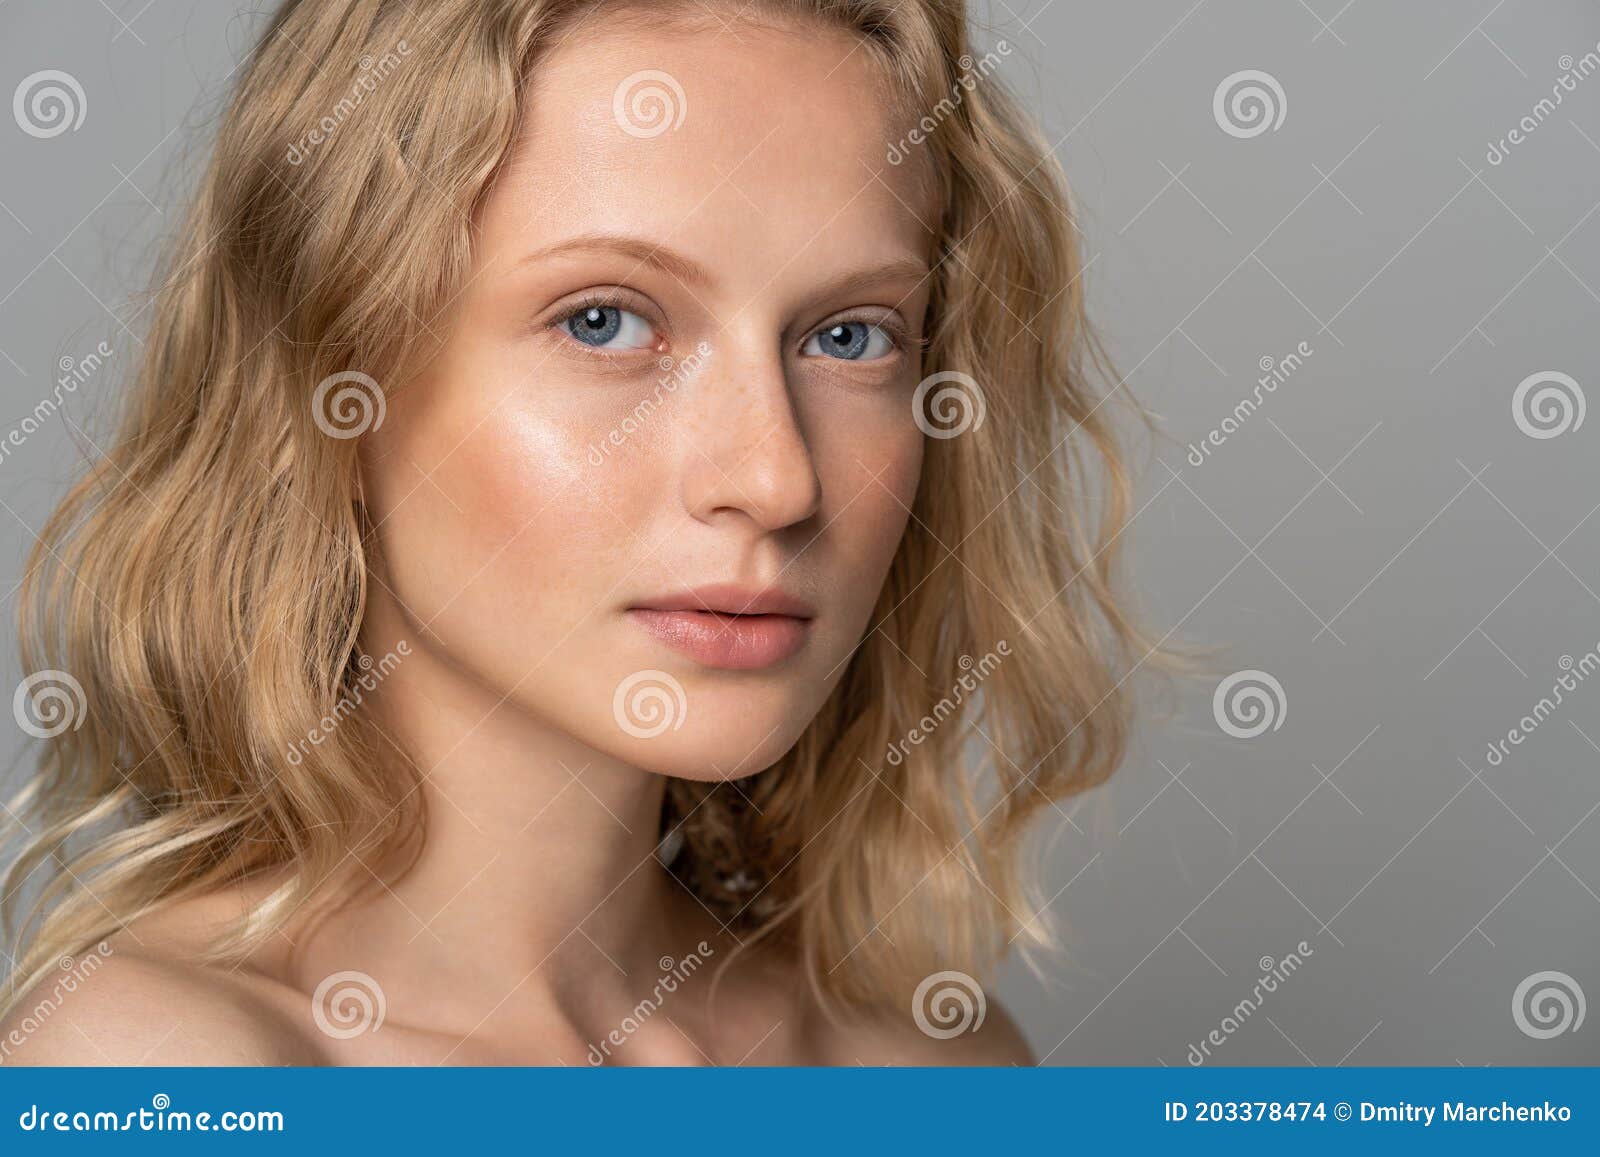 Close Up of Young Woman Face with Blue Eyes, Curly Natural Blonde Hair and  Eyebrows, Has No Makeup, Looking at Camera. Girl with Stock Photo - Image  of nude, blue: 203378474